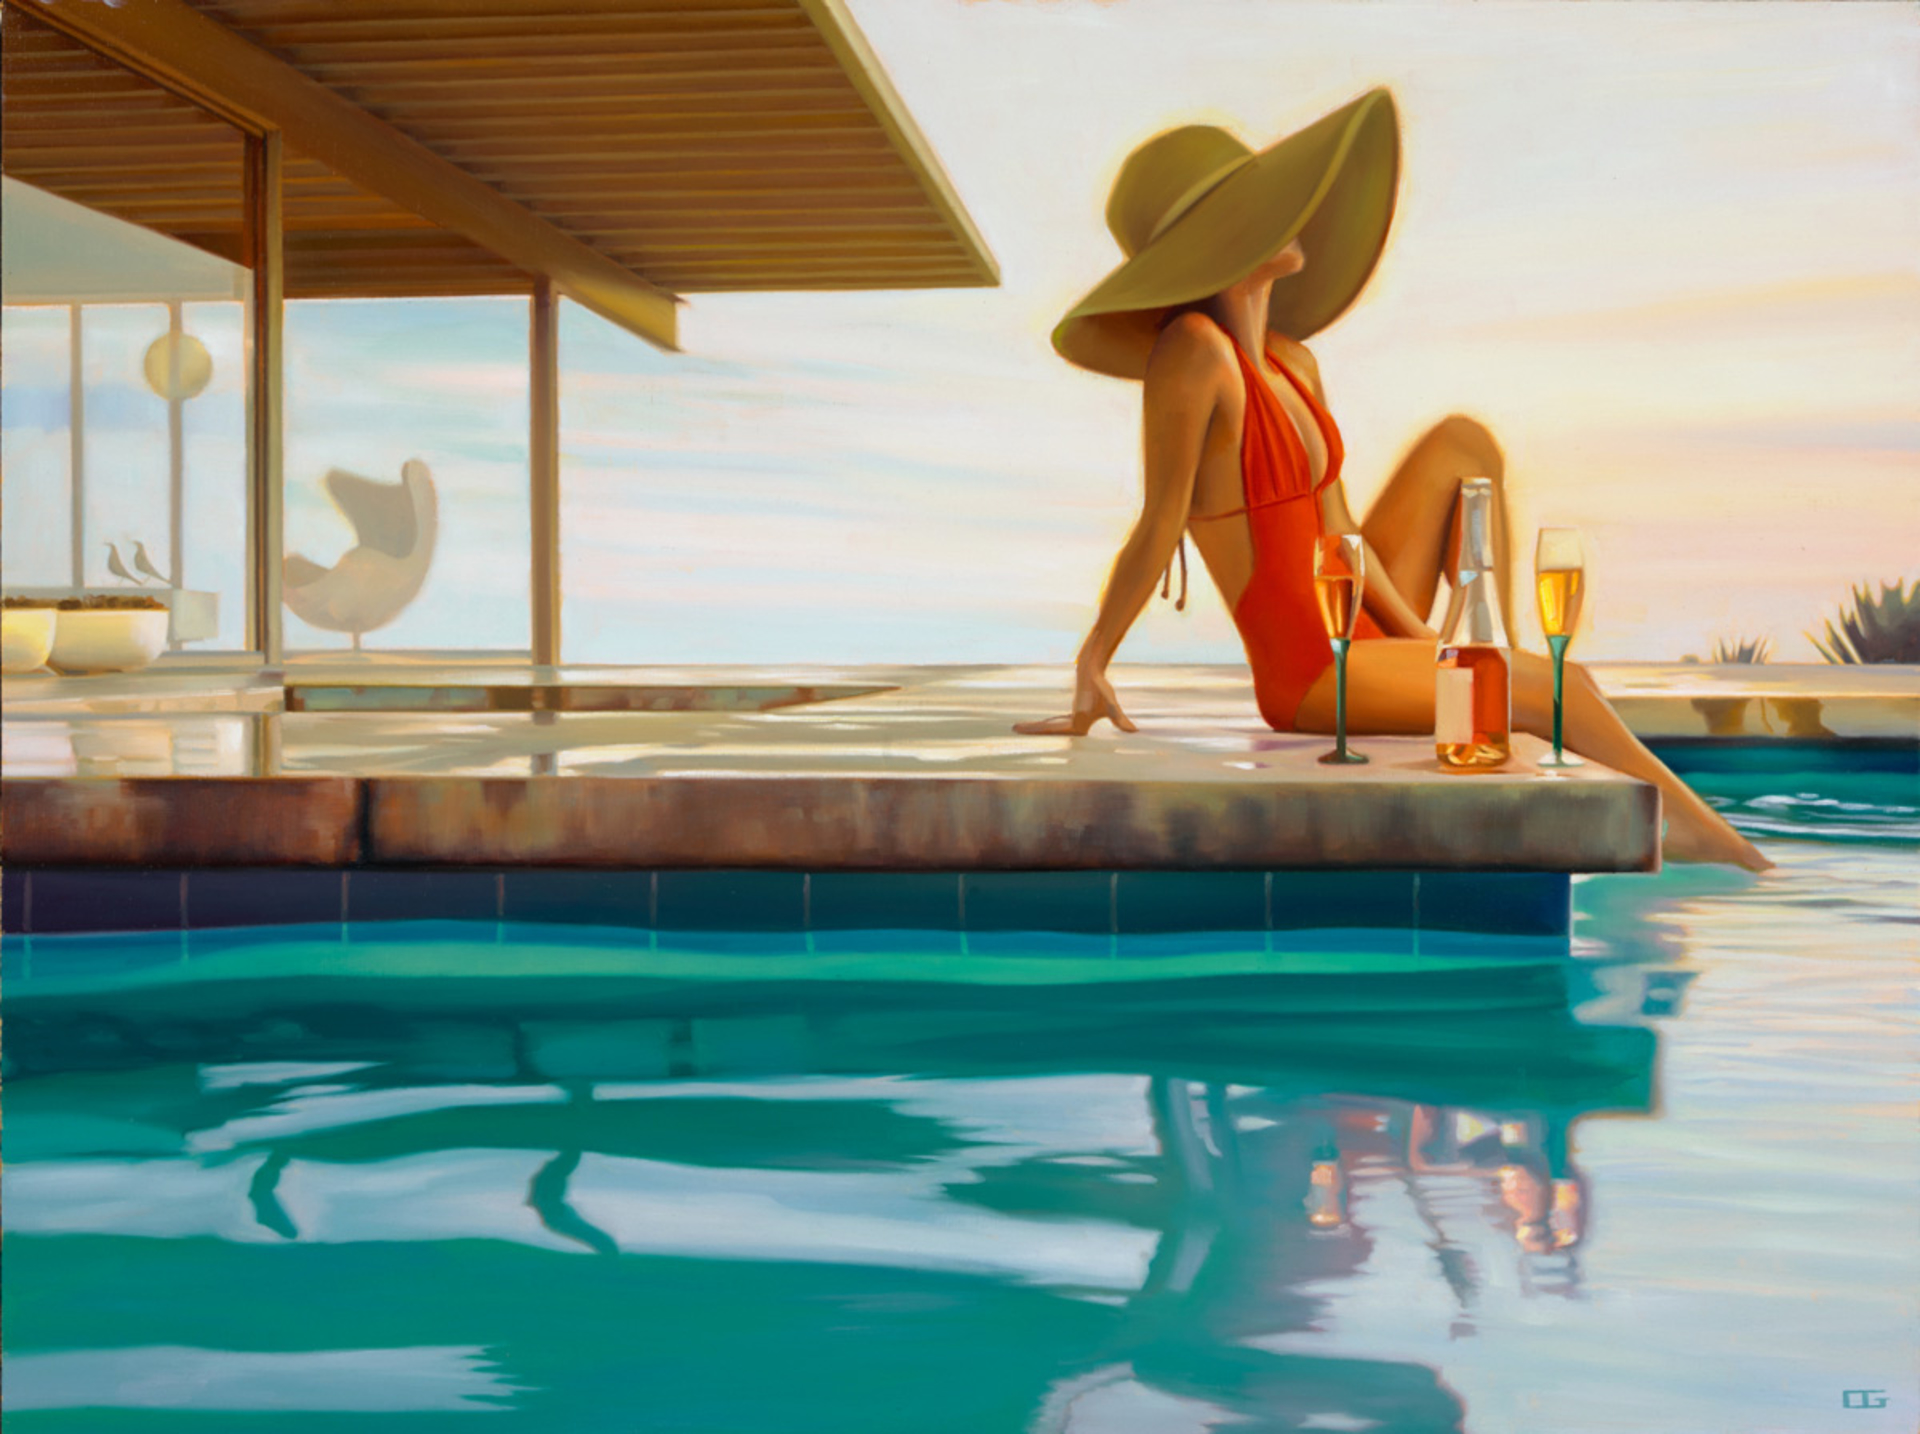 Warm Concrete, Cool Rosé (S/N) by Carrie Graber